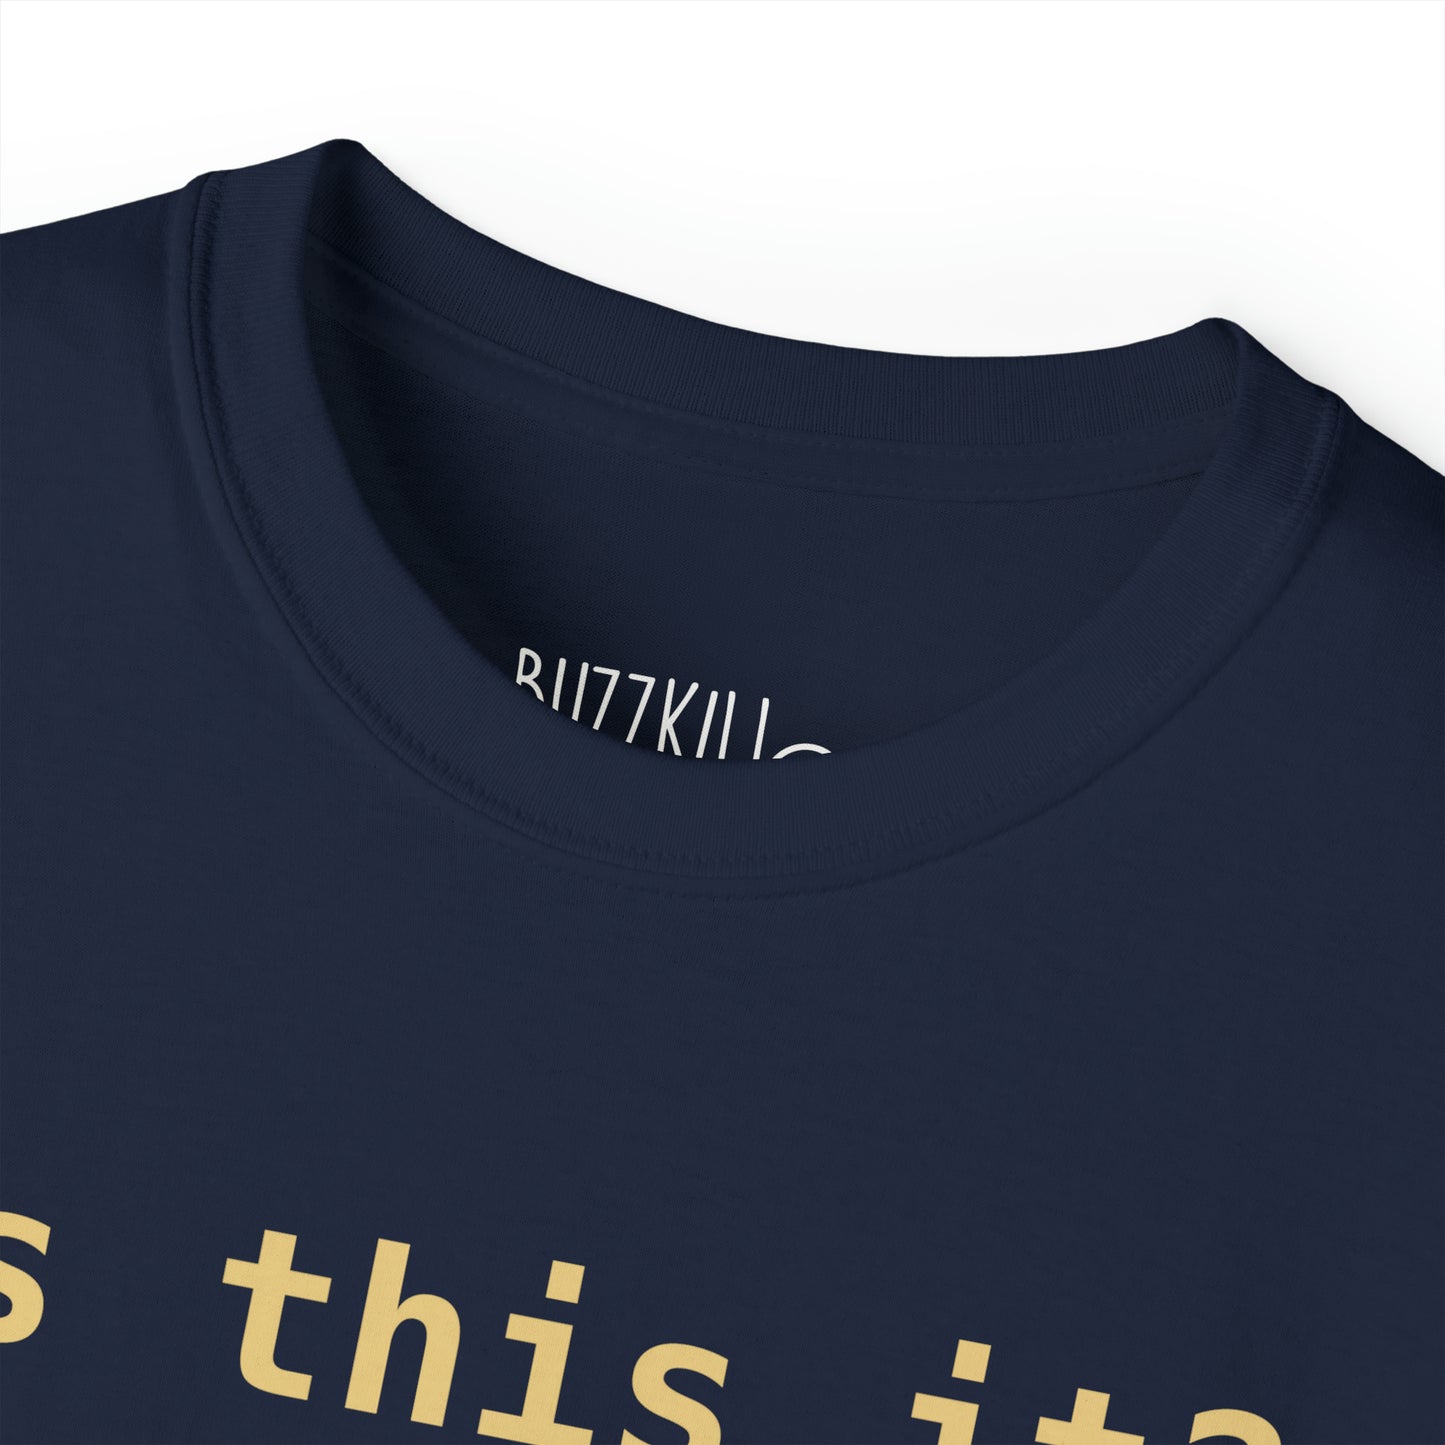 Is This It? - Unisex Ultra Cotton Tee